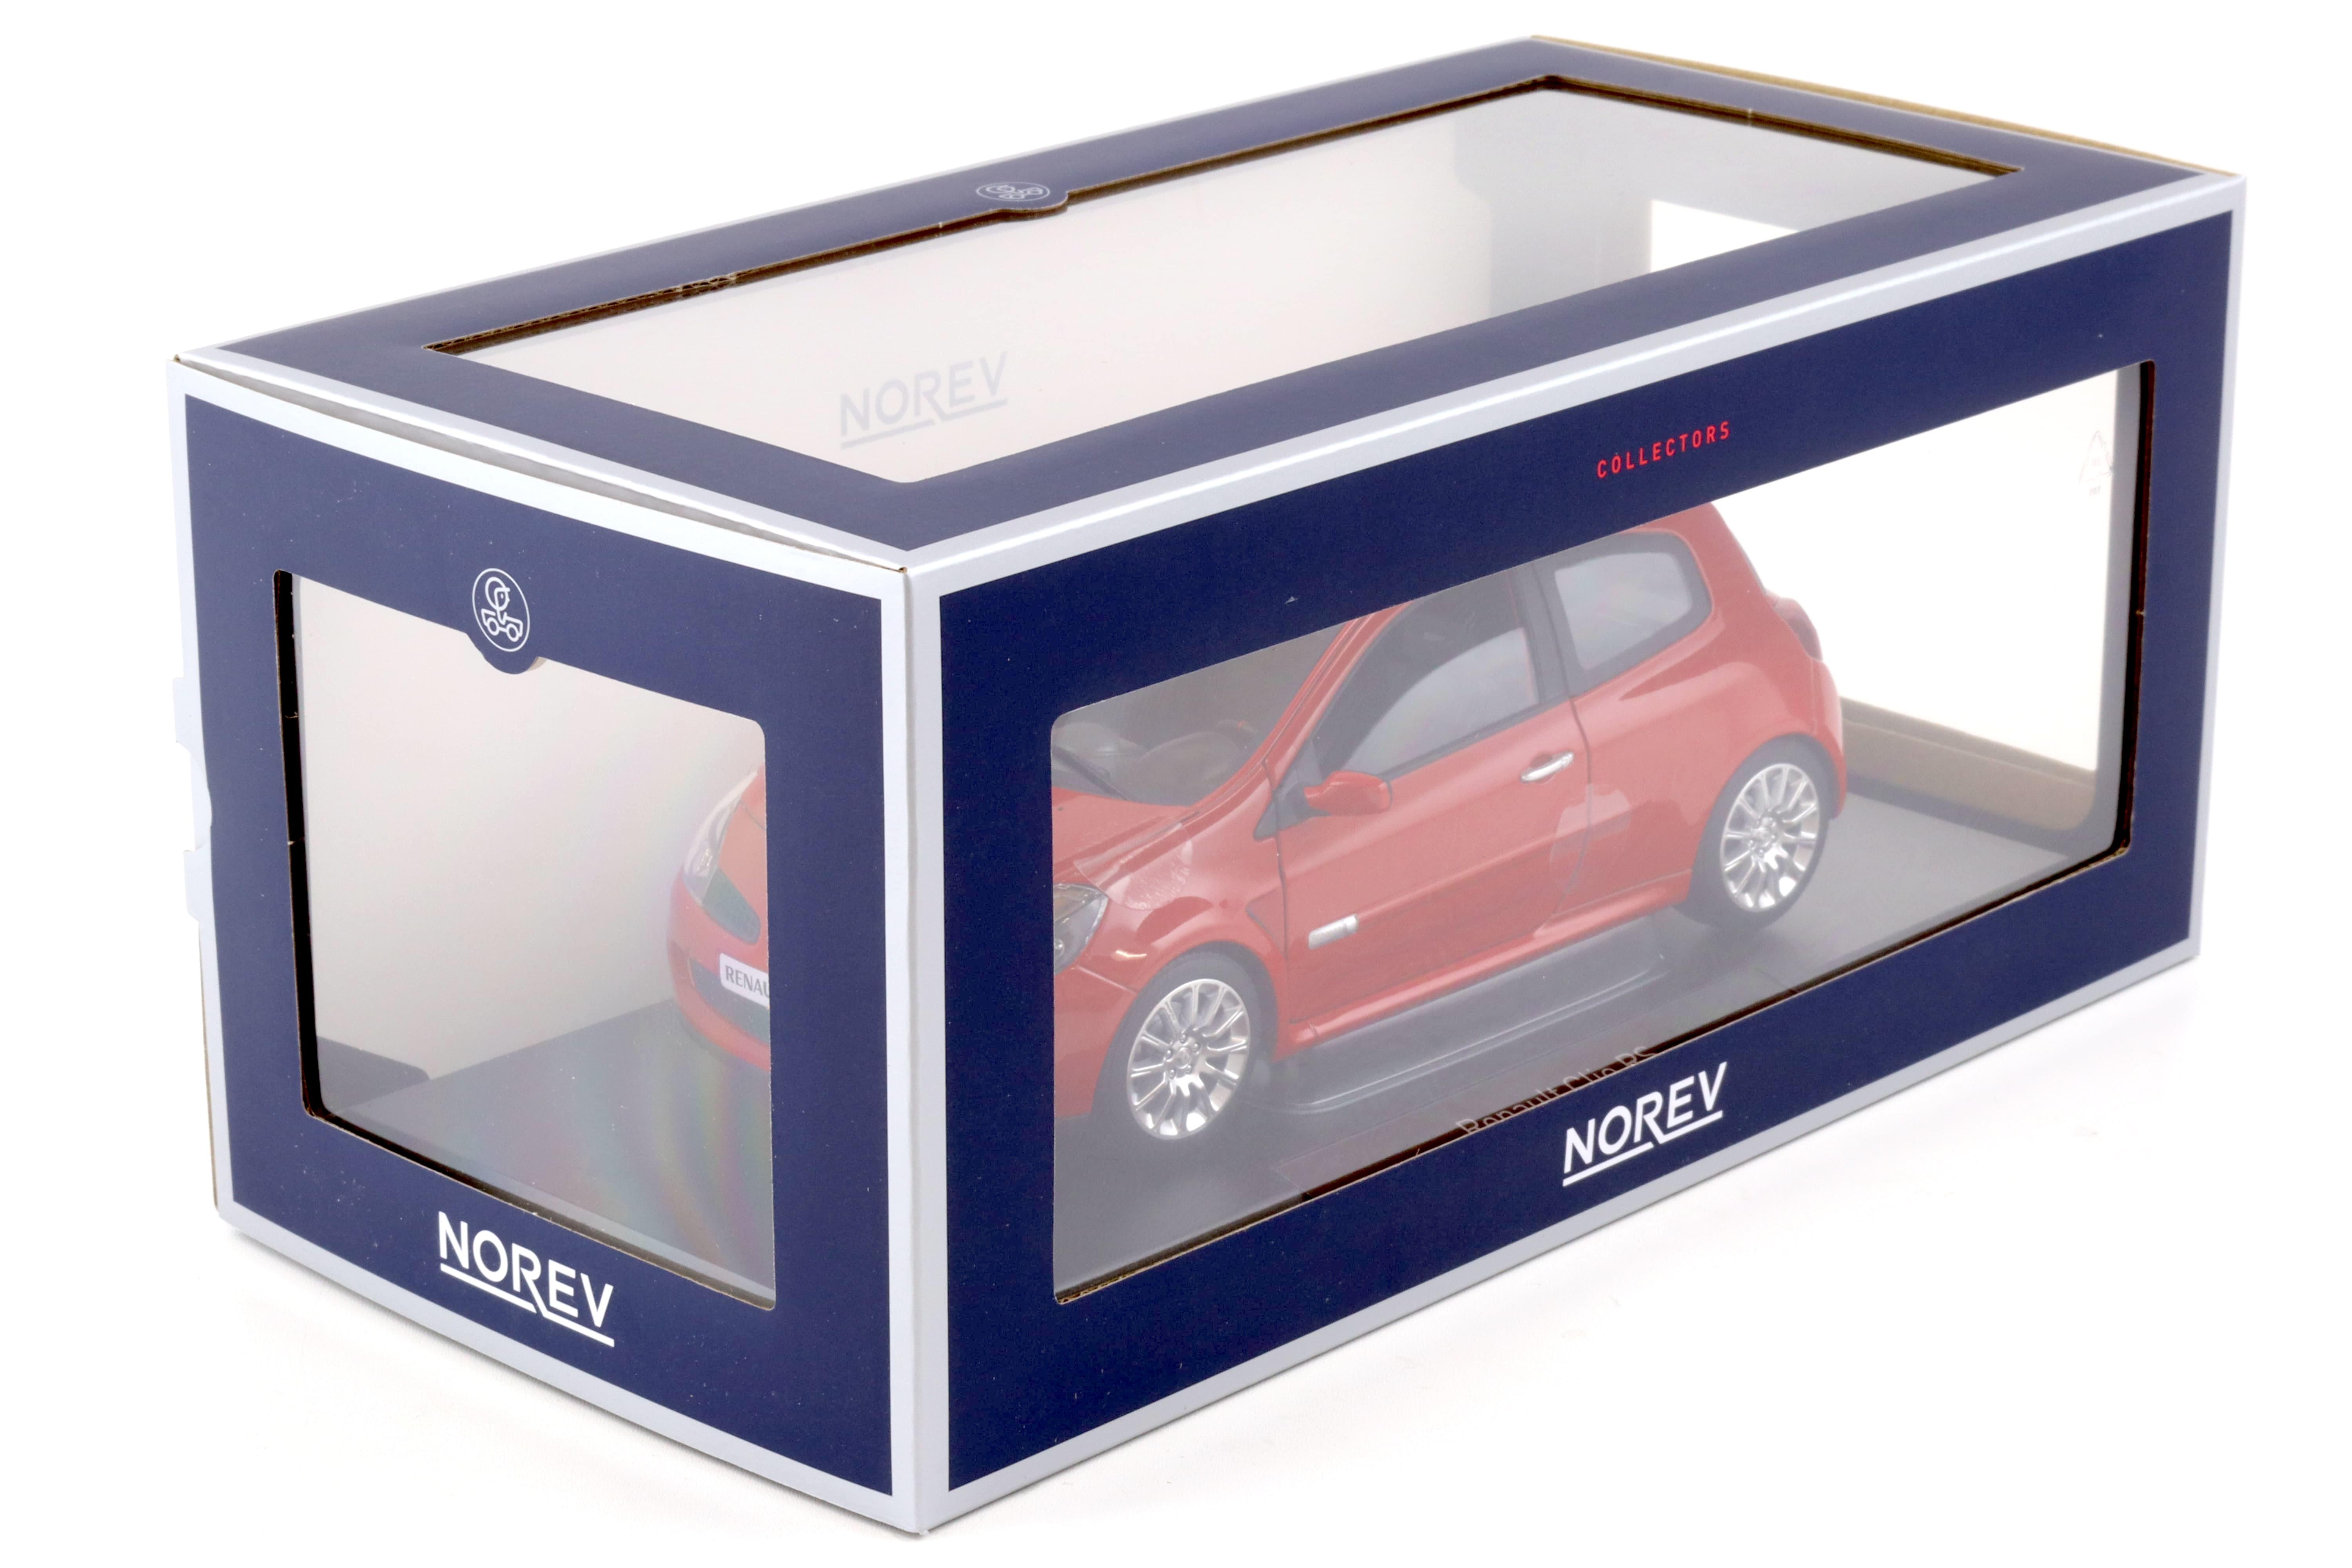 1:18 Norev Renault Clio 3 RS 2006 Toro red